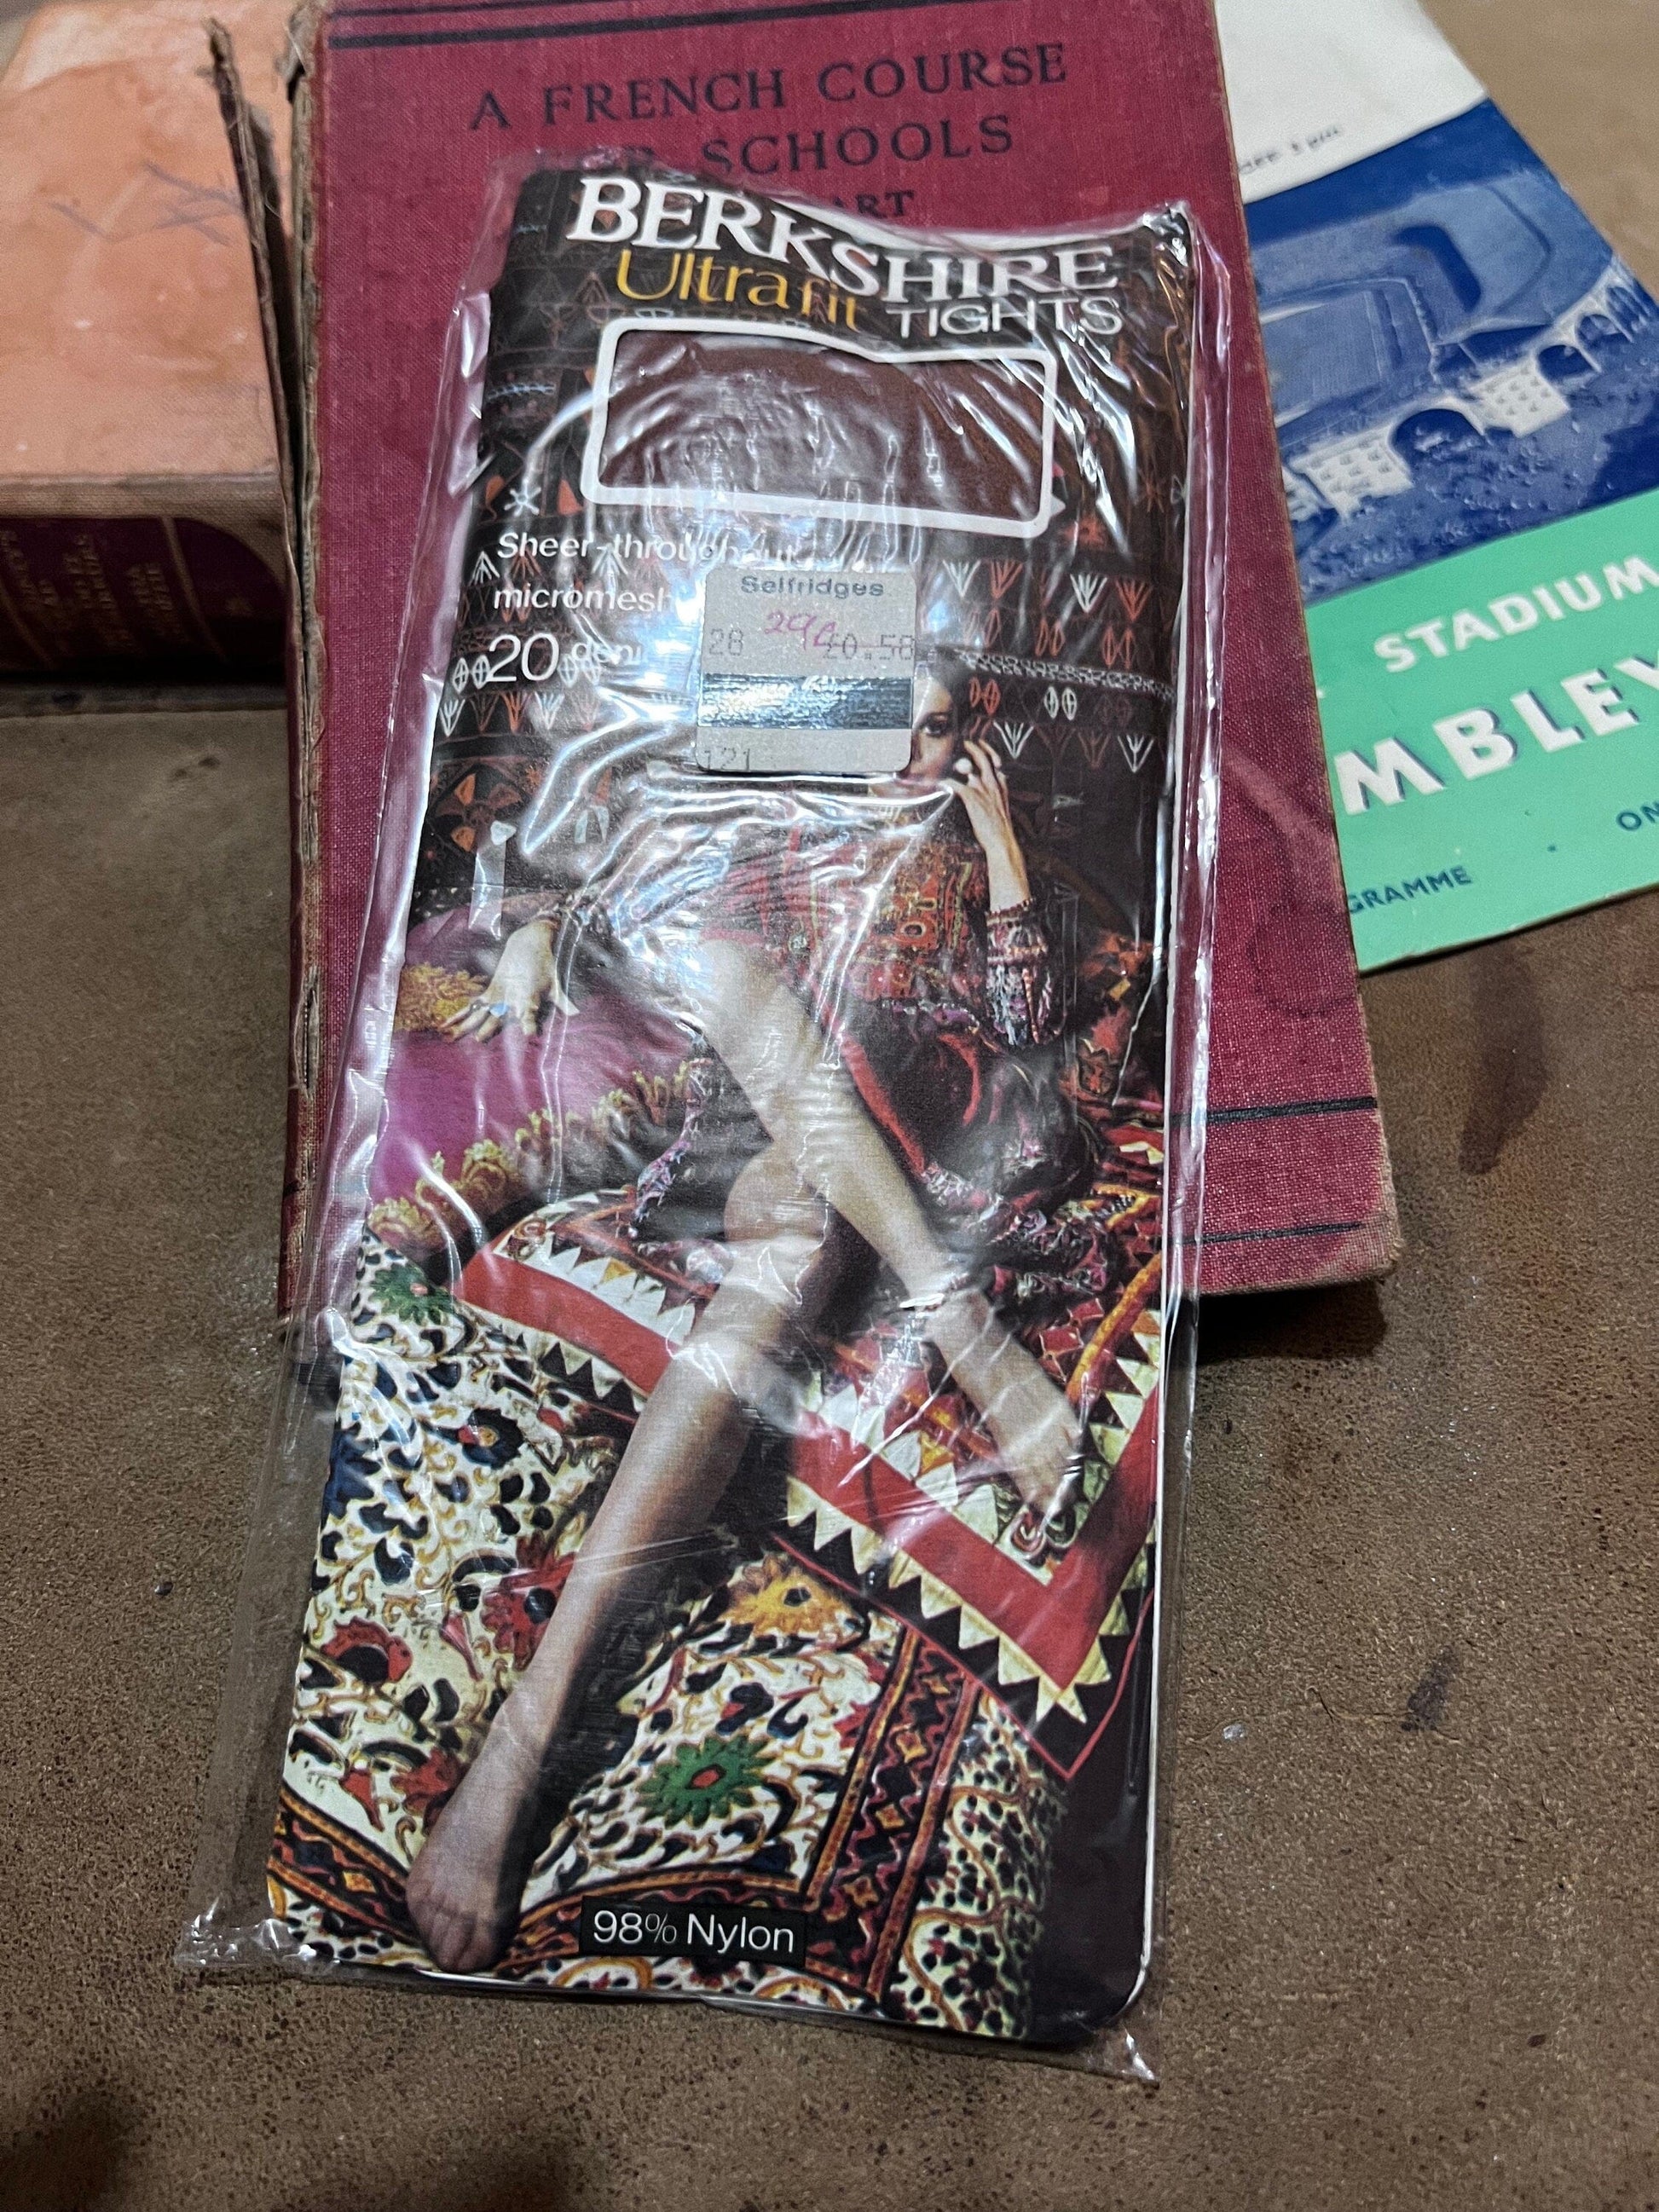 Vintage Womens Berkshire ultra fit Tan Tights Deadstock Tights Black and Brown Retro 60s 70s 1960s 1970s New in Packaging, vintage tights